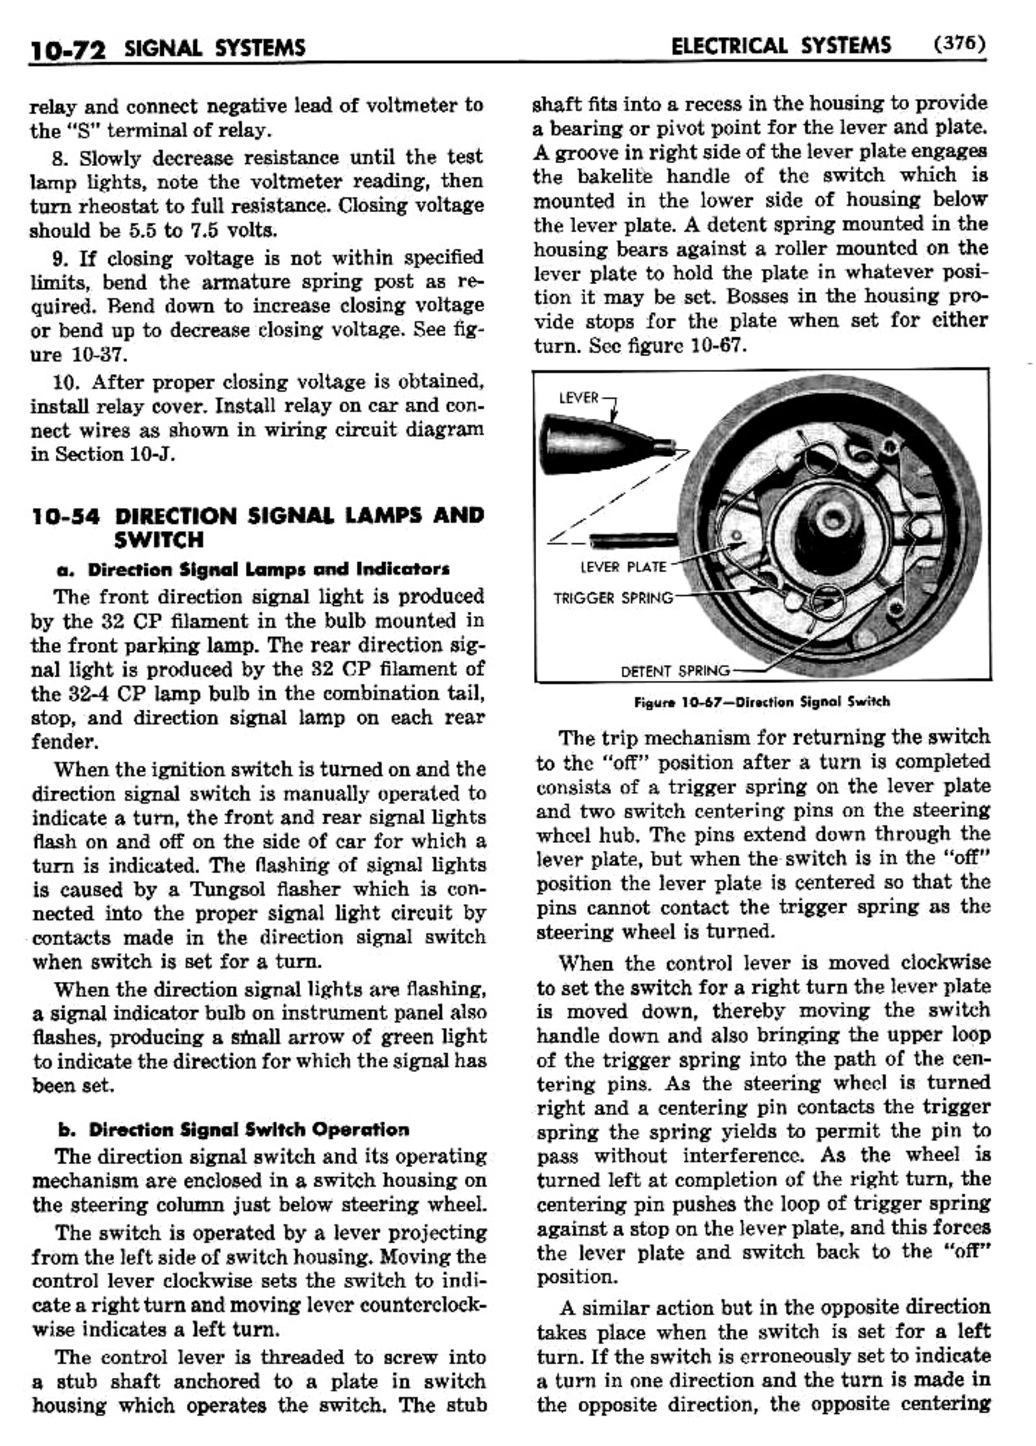 n_11 1955 Buick Shop Manual - Electrical Systems-072-072.jpg